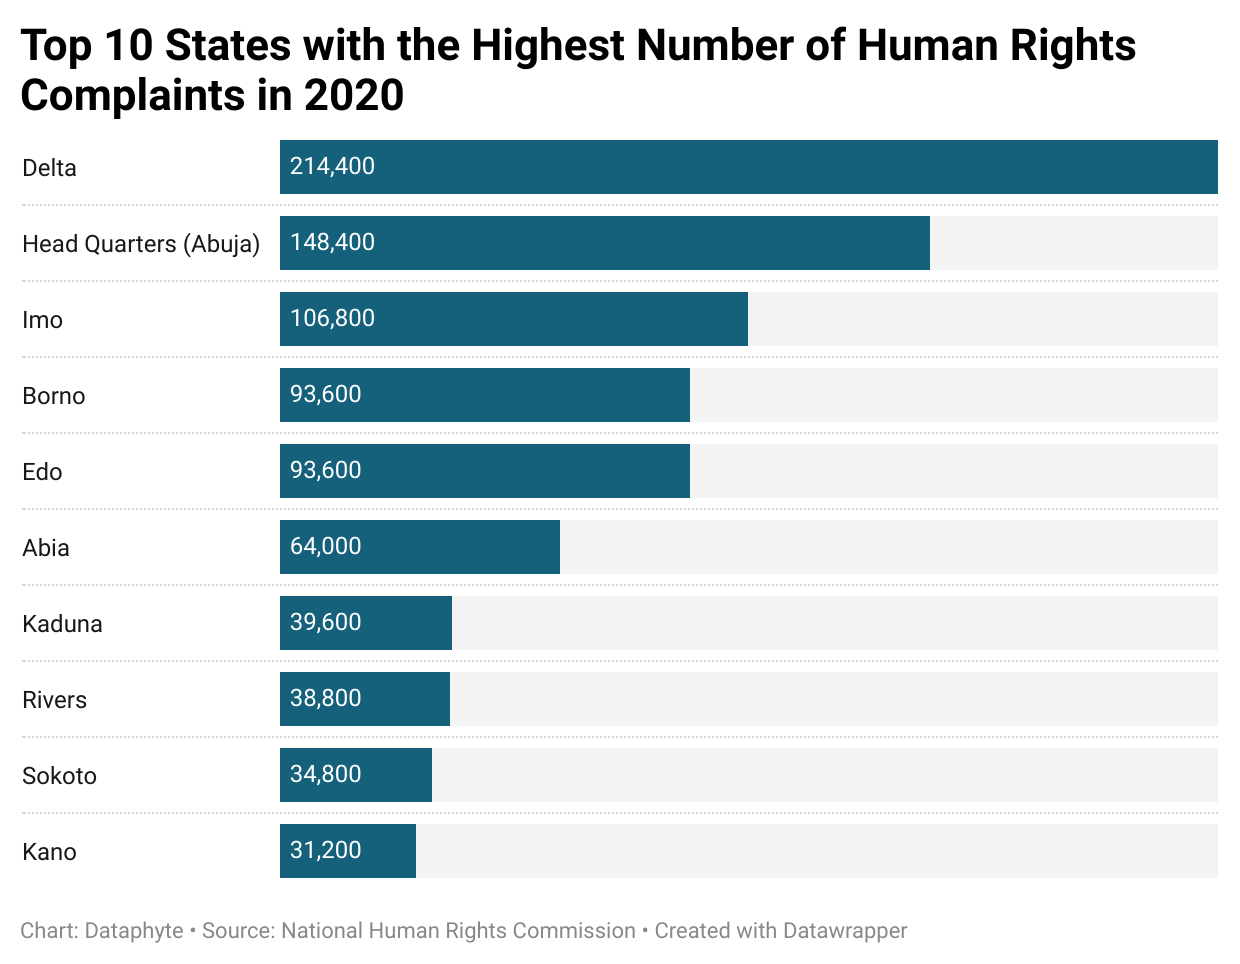 A Bar chart showing top 10 states with the highest number of human rights complaints in 2020.